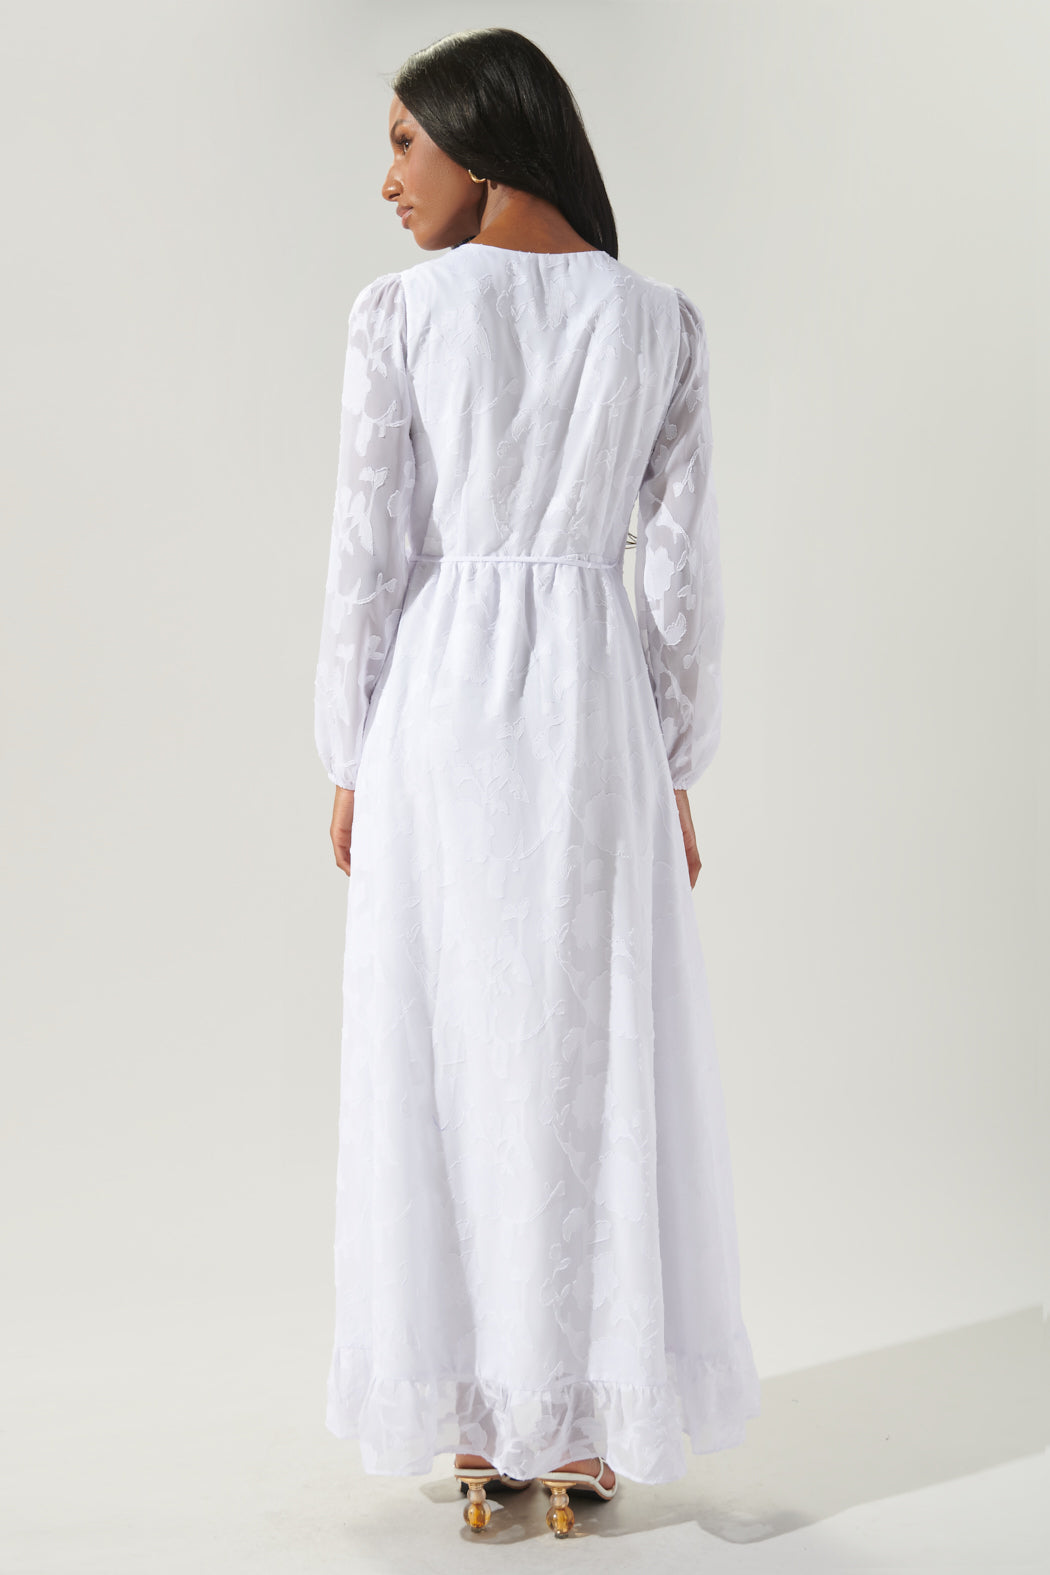 Diop. The Mud White Wax Print Robe Small